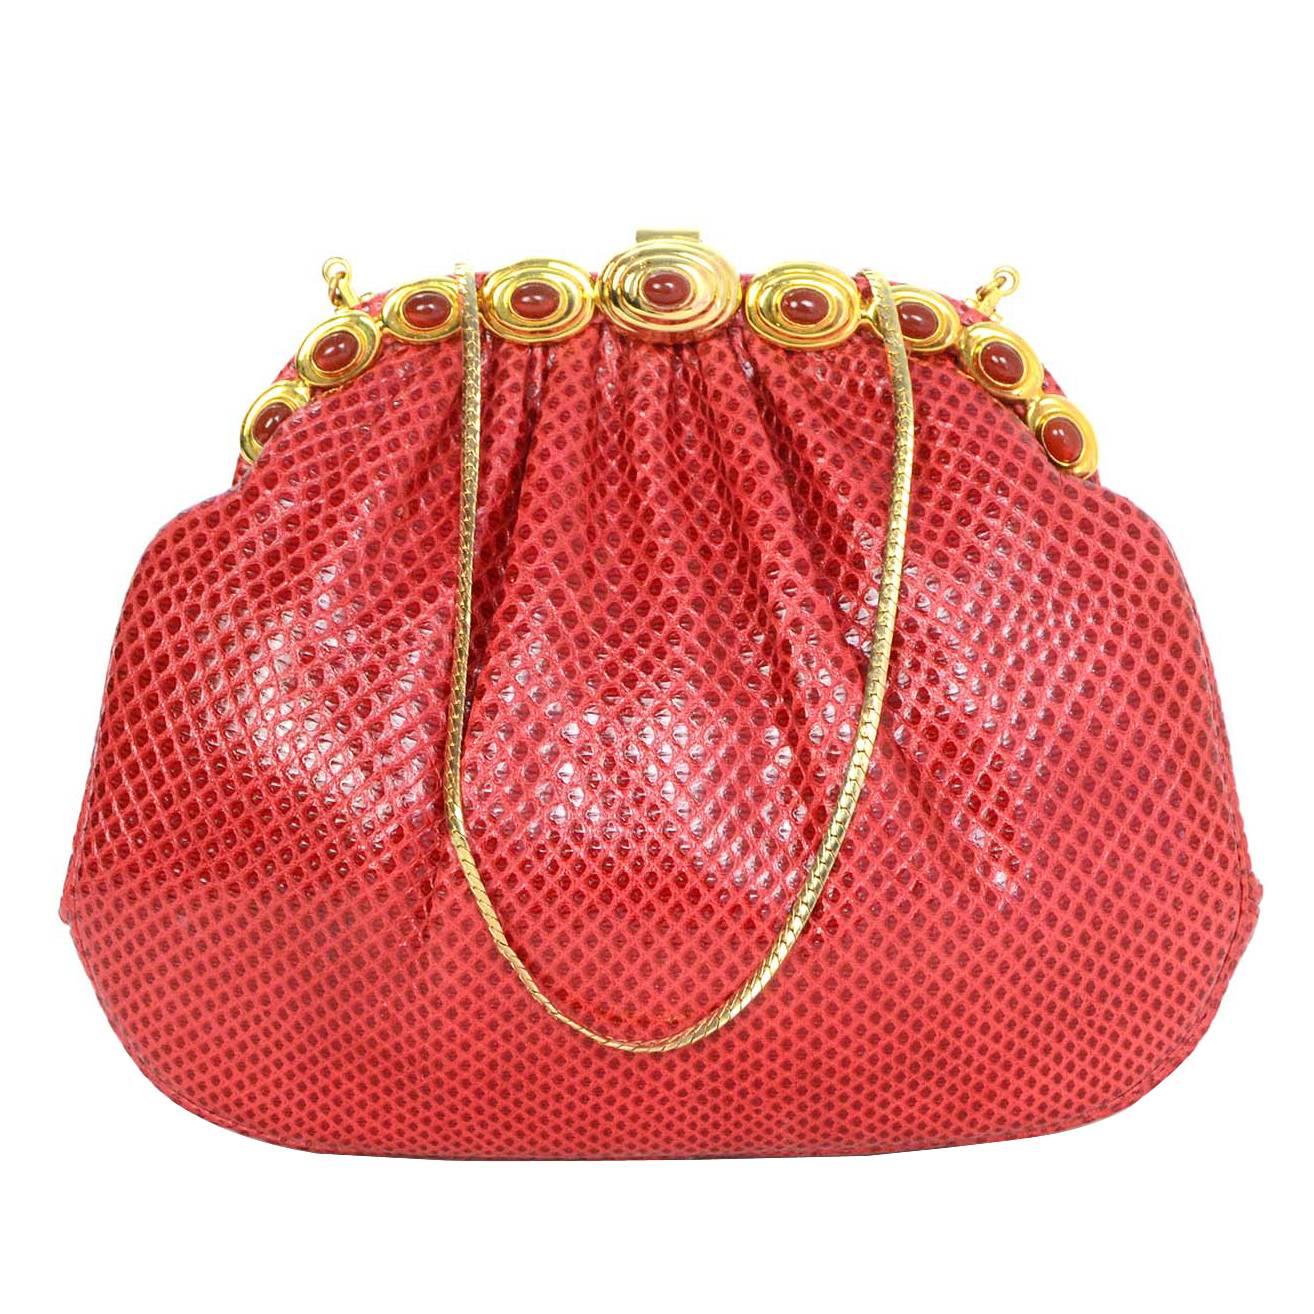 Judith Leiber Red Karung Snakeskin Clutch with GHW